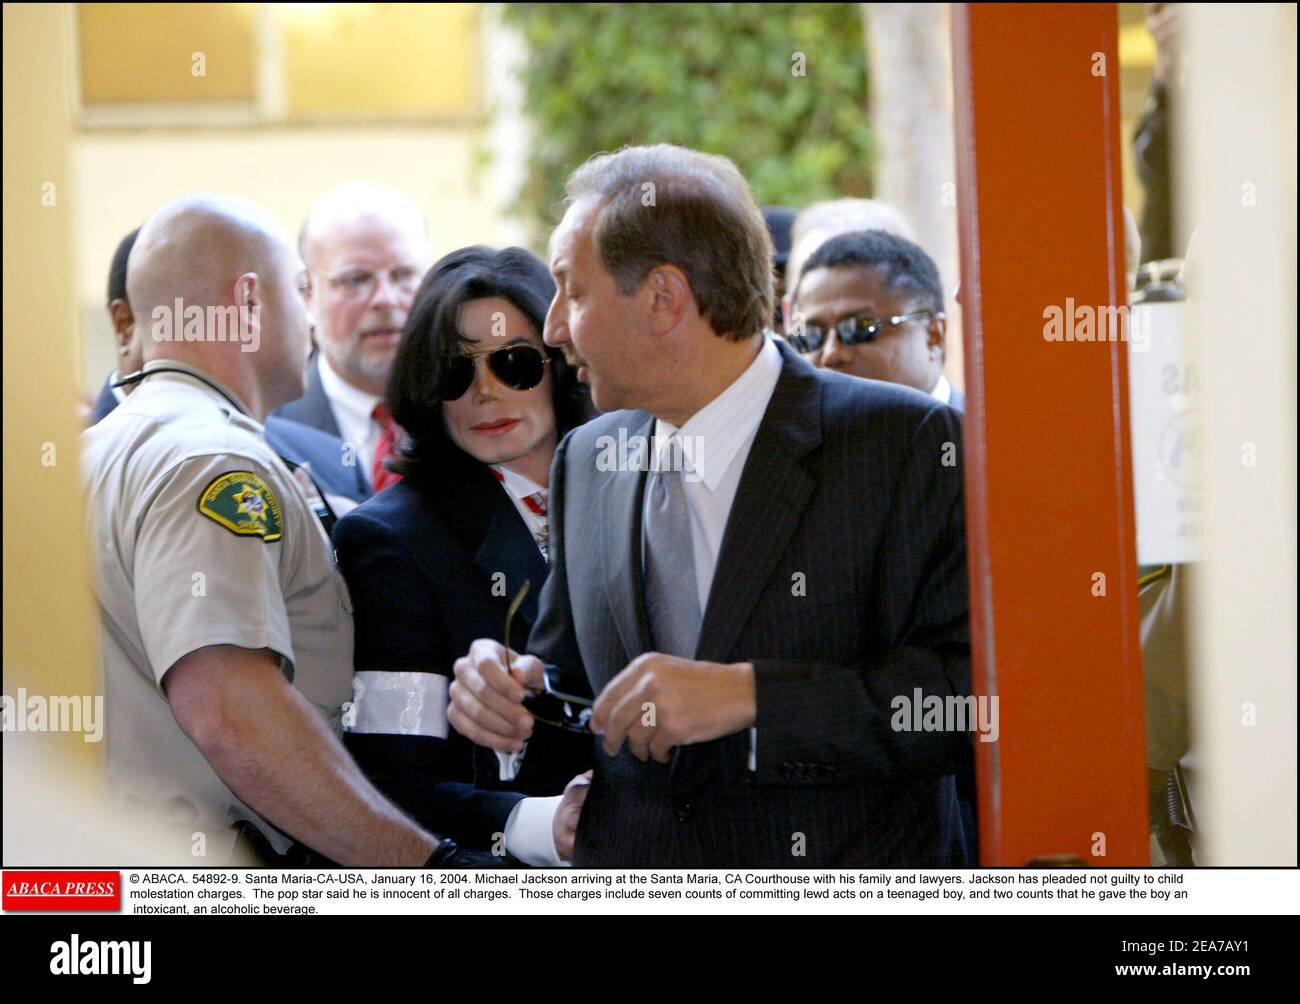 © ABACA. 54892-9. Santa Maria-CA-USA, January 16, 2004. Michael Jackson arriving at the Santa Maria, CA Courthouse with his family and lawyers. Jackson has pleaded not guilty to child molestation charges. The pop star said he is innocent of all charges. Those charges include seven counts of committing lewd acts on a teenaged boy, and two counts that he gave the boy an intoxicant, an alcoholic beverage. Stock Photo